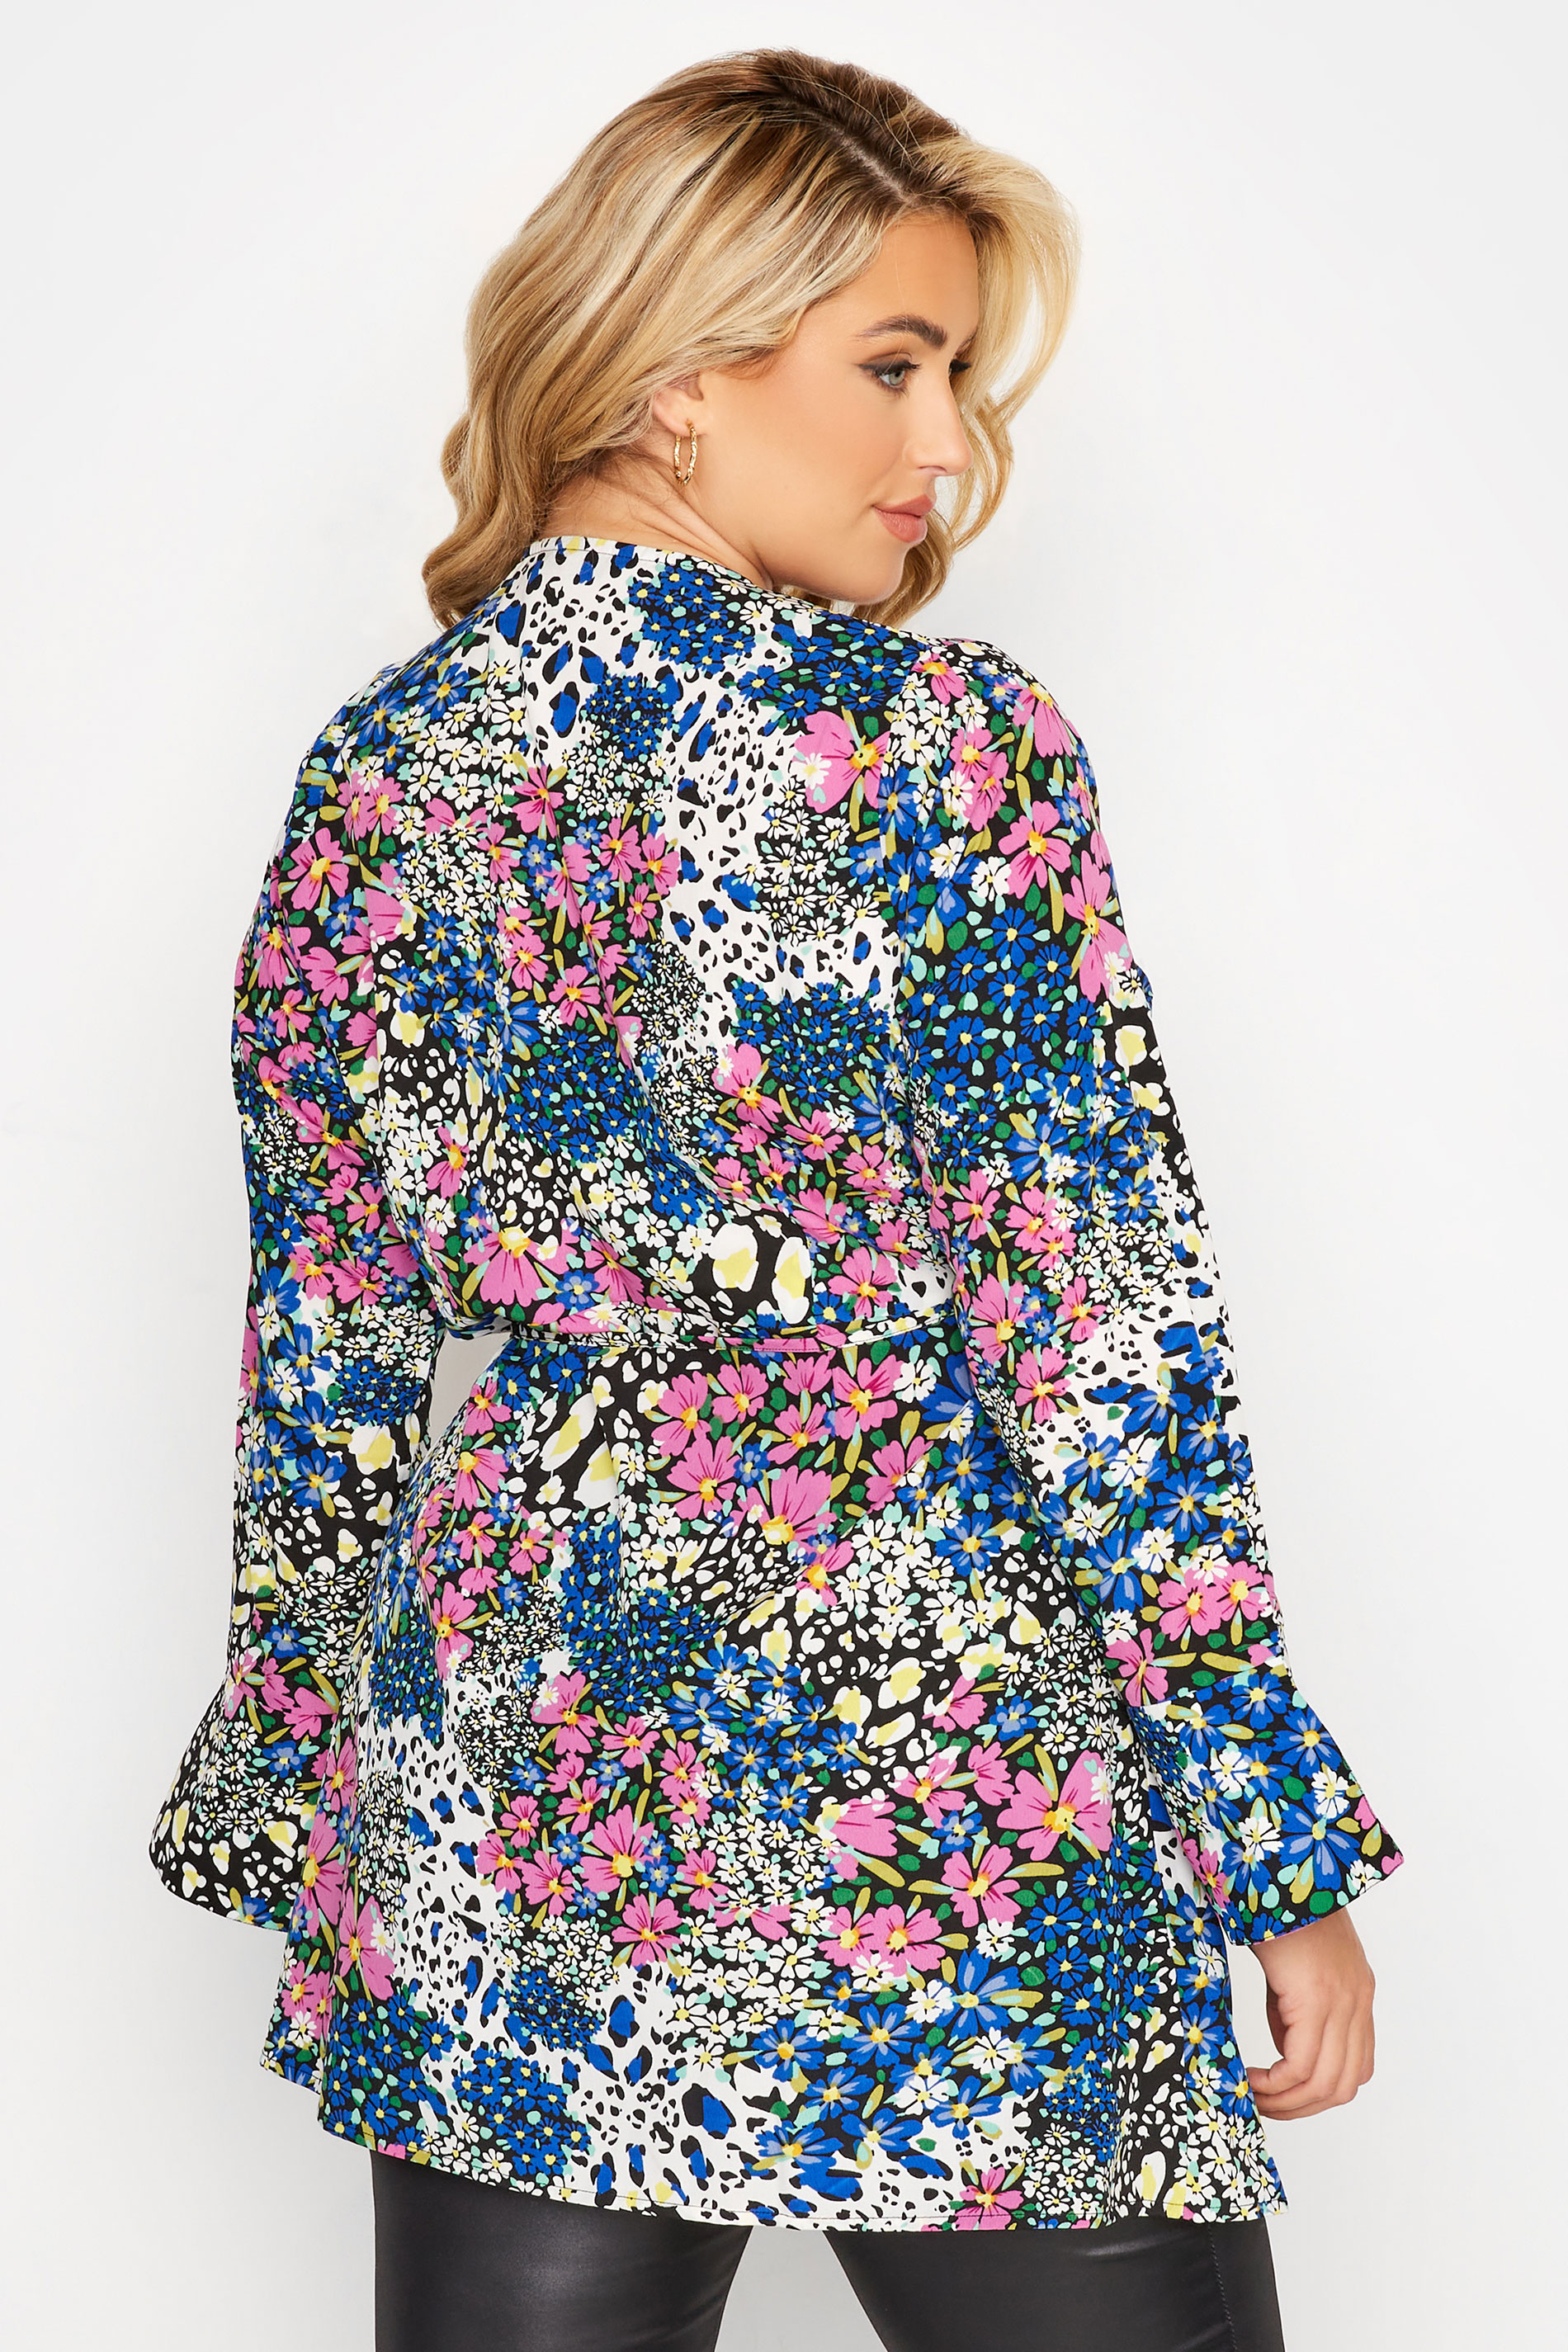 LIMITED COLLECTION Plus Size Black & Blue Mixed Floral Print Wrap Top | Yours Clothing 3